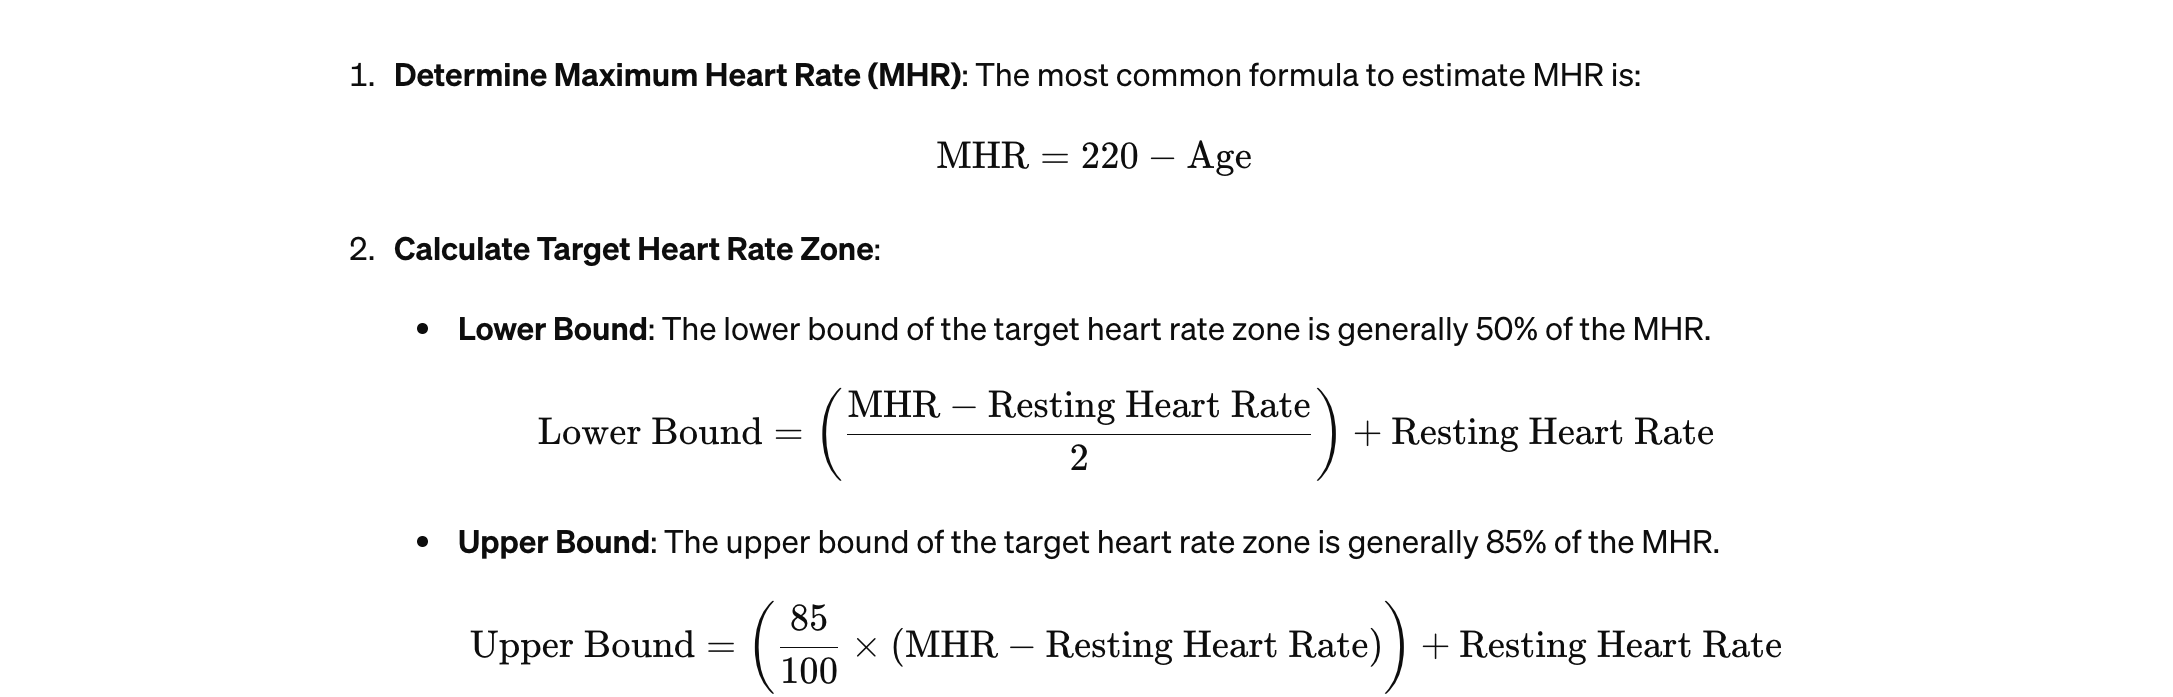 Advantages of Using a Target Heart Rate Calculator